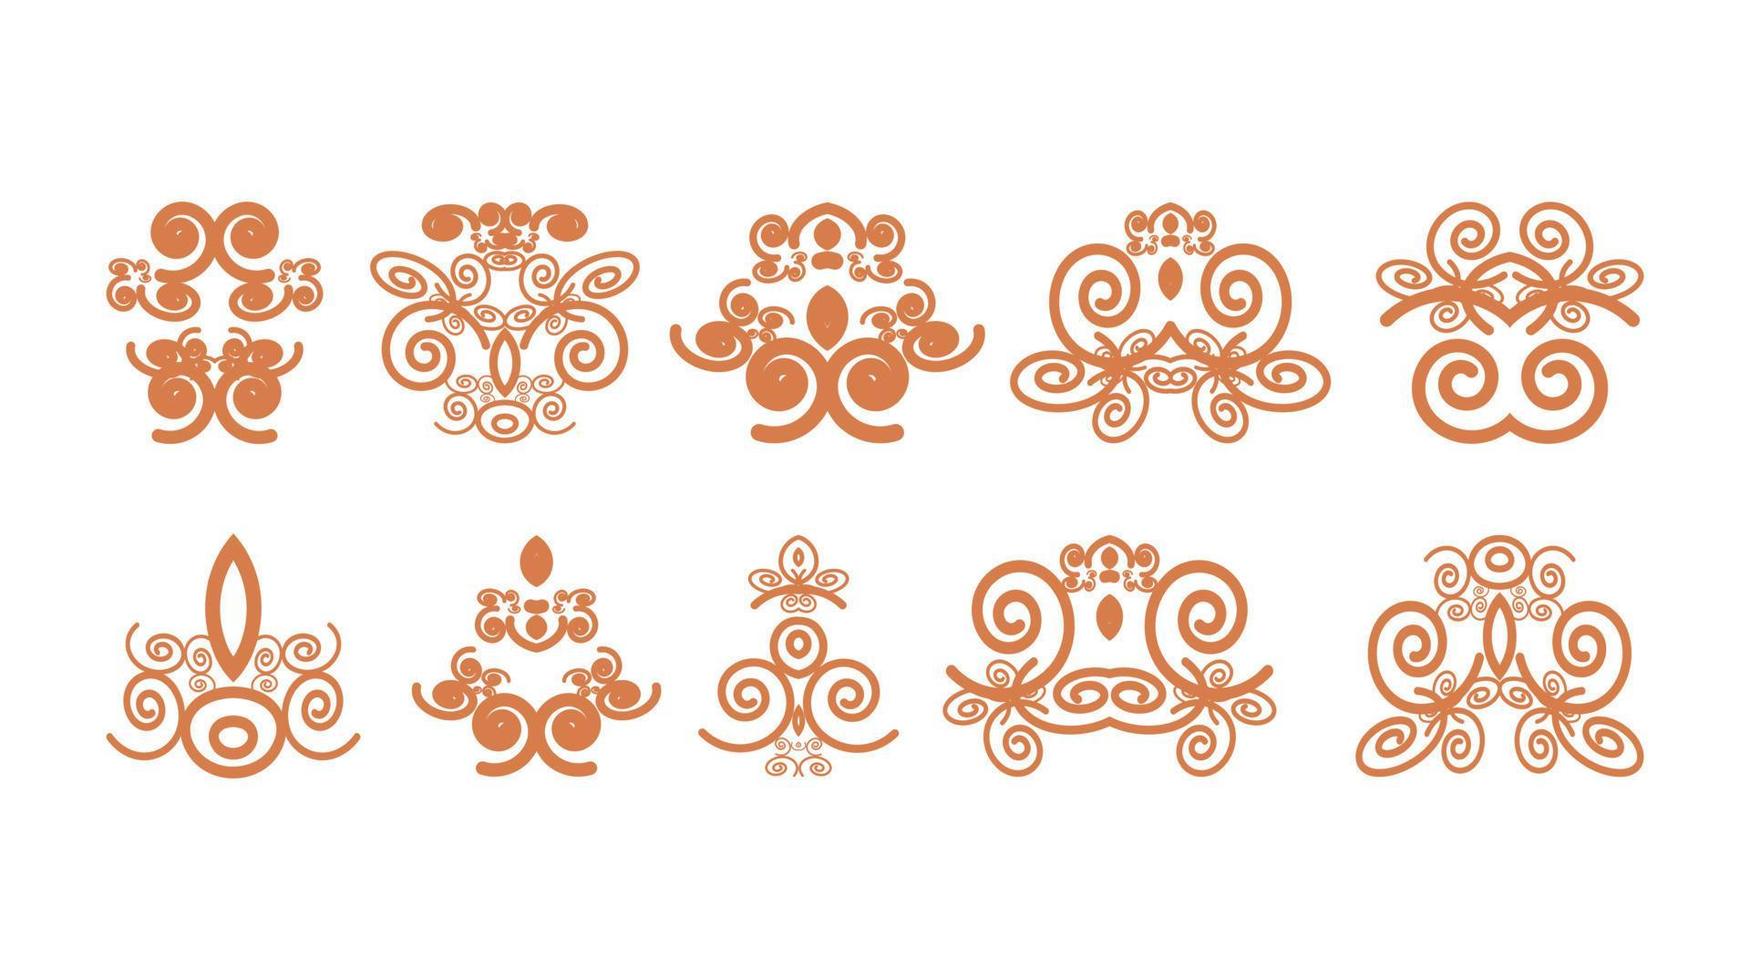 Free vector collection set of label ornament vector illustration